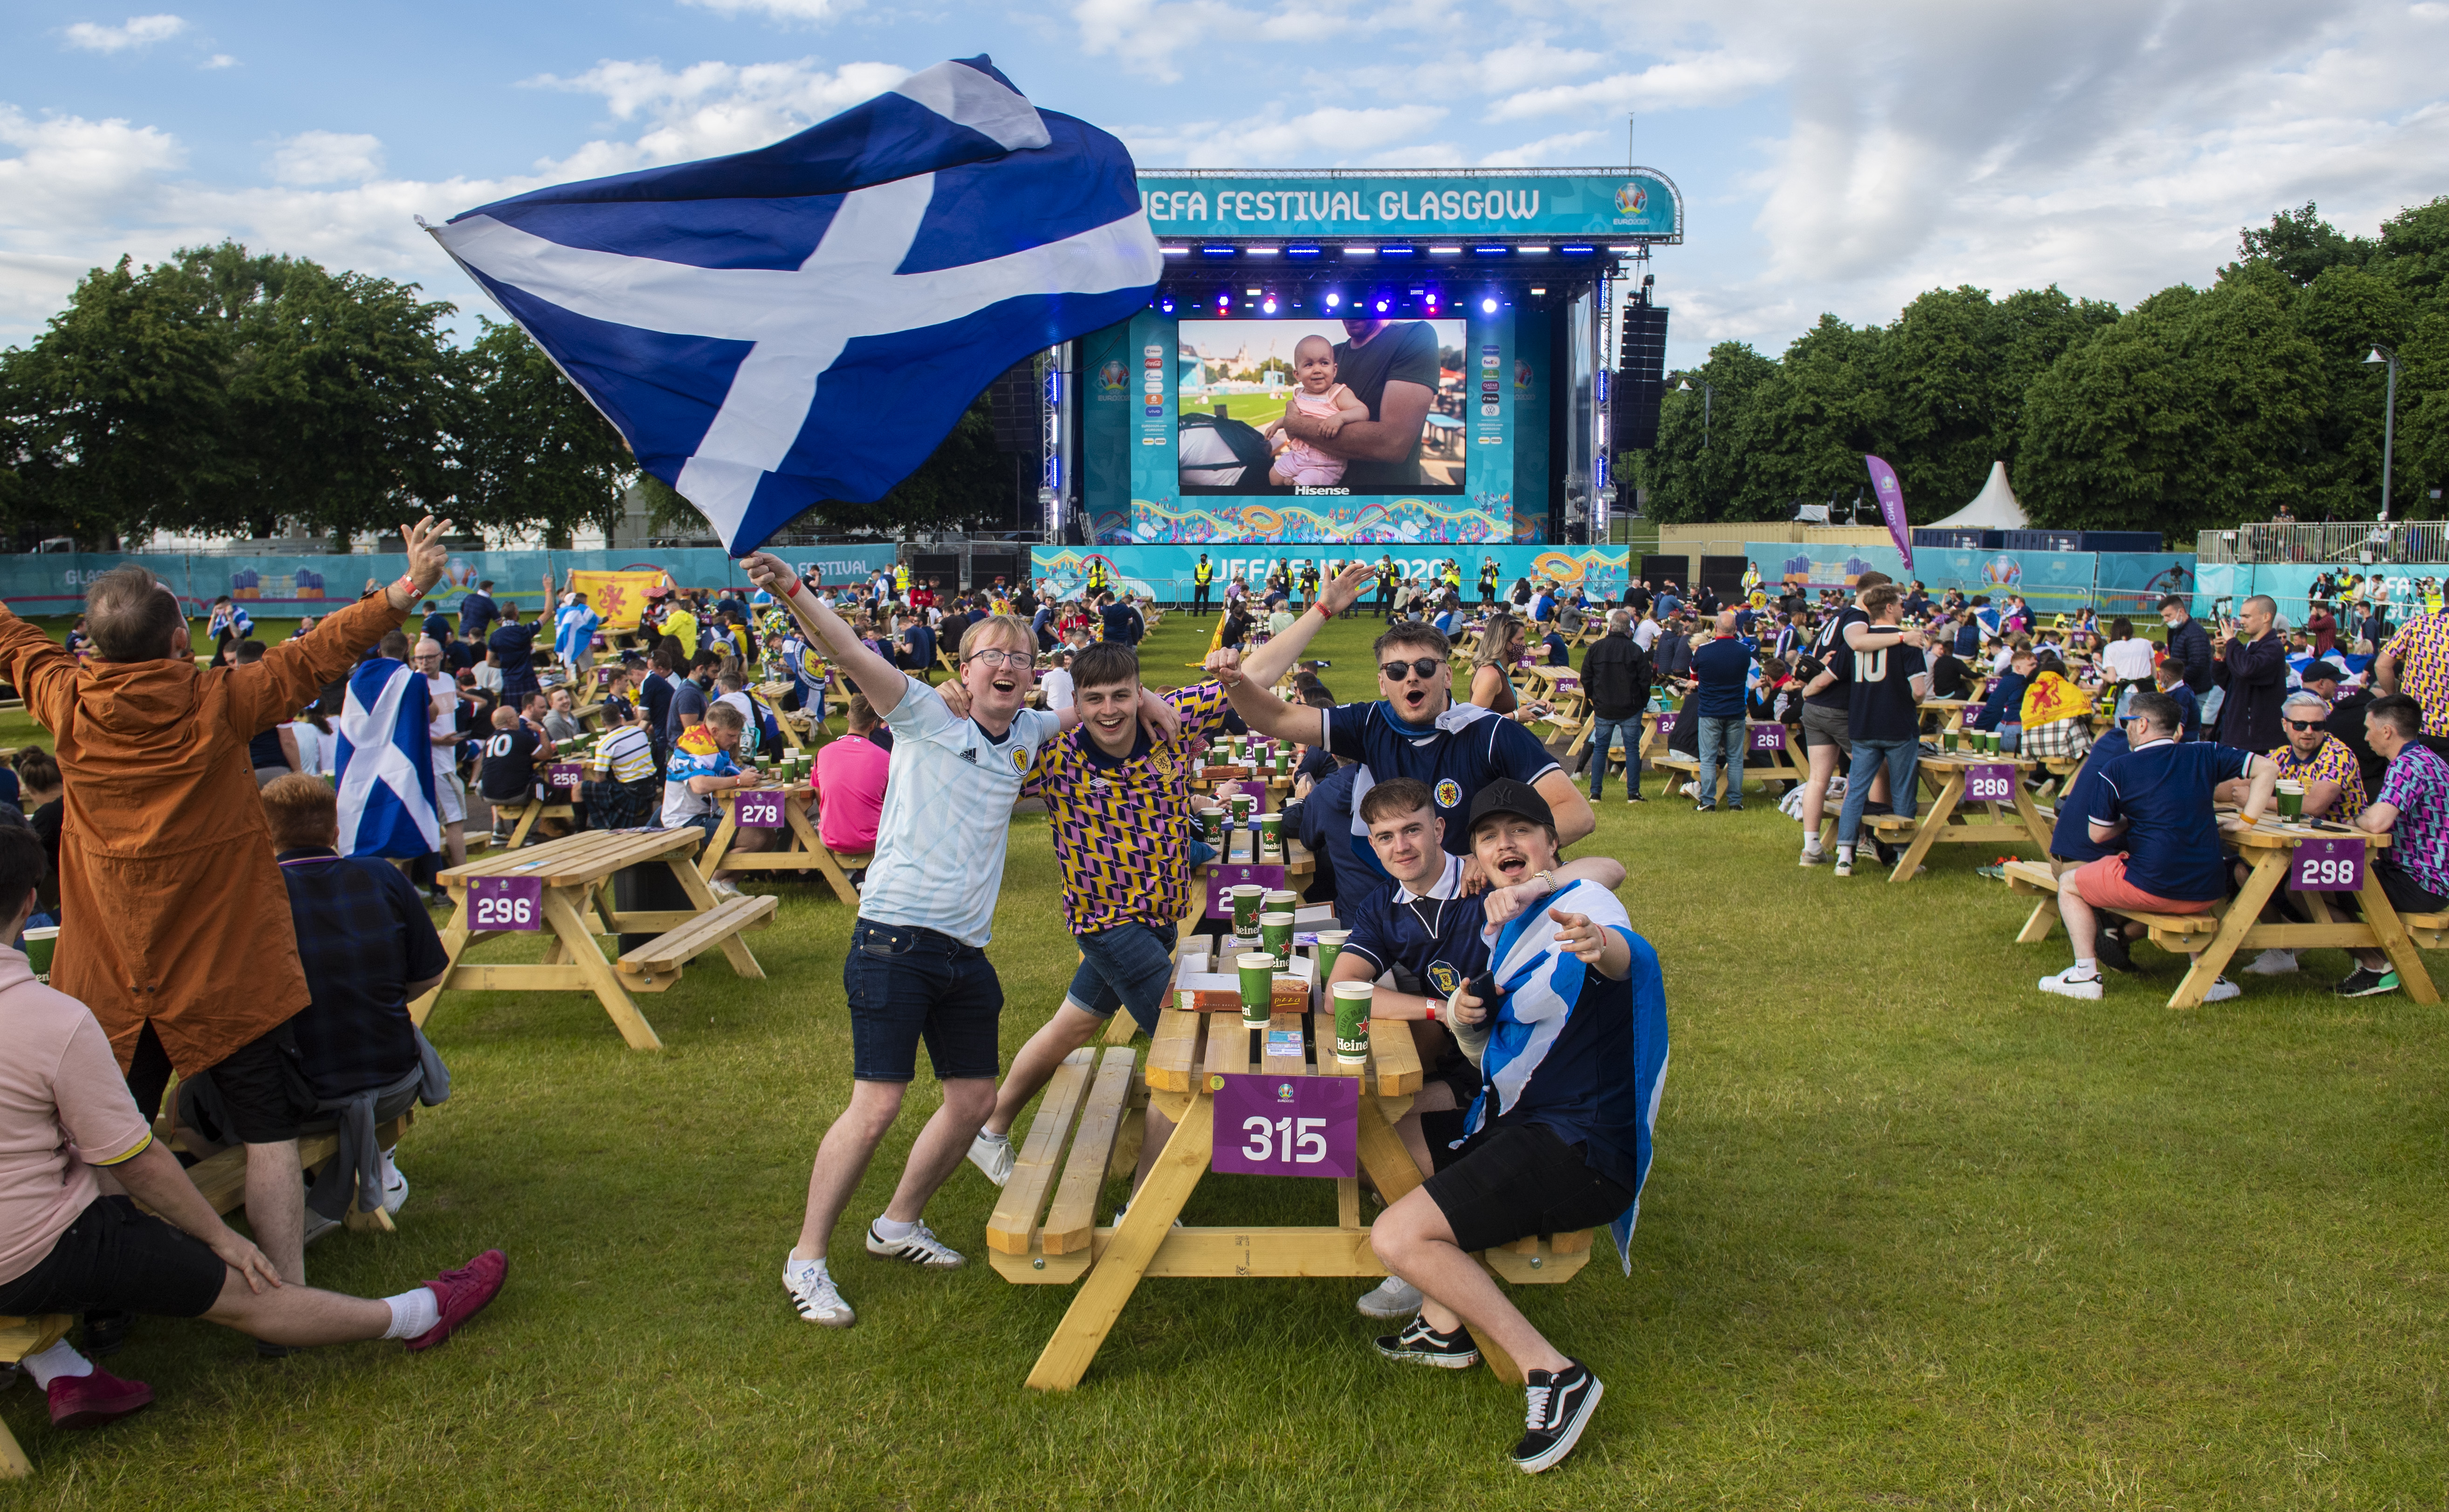 Home support: Scots watch the game at Glasgow's fan zone.